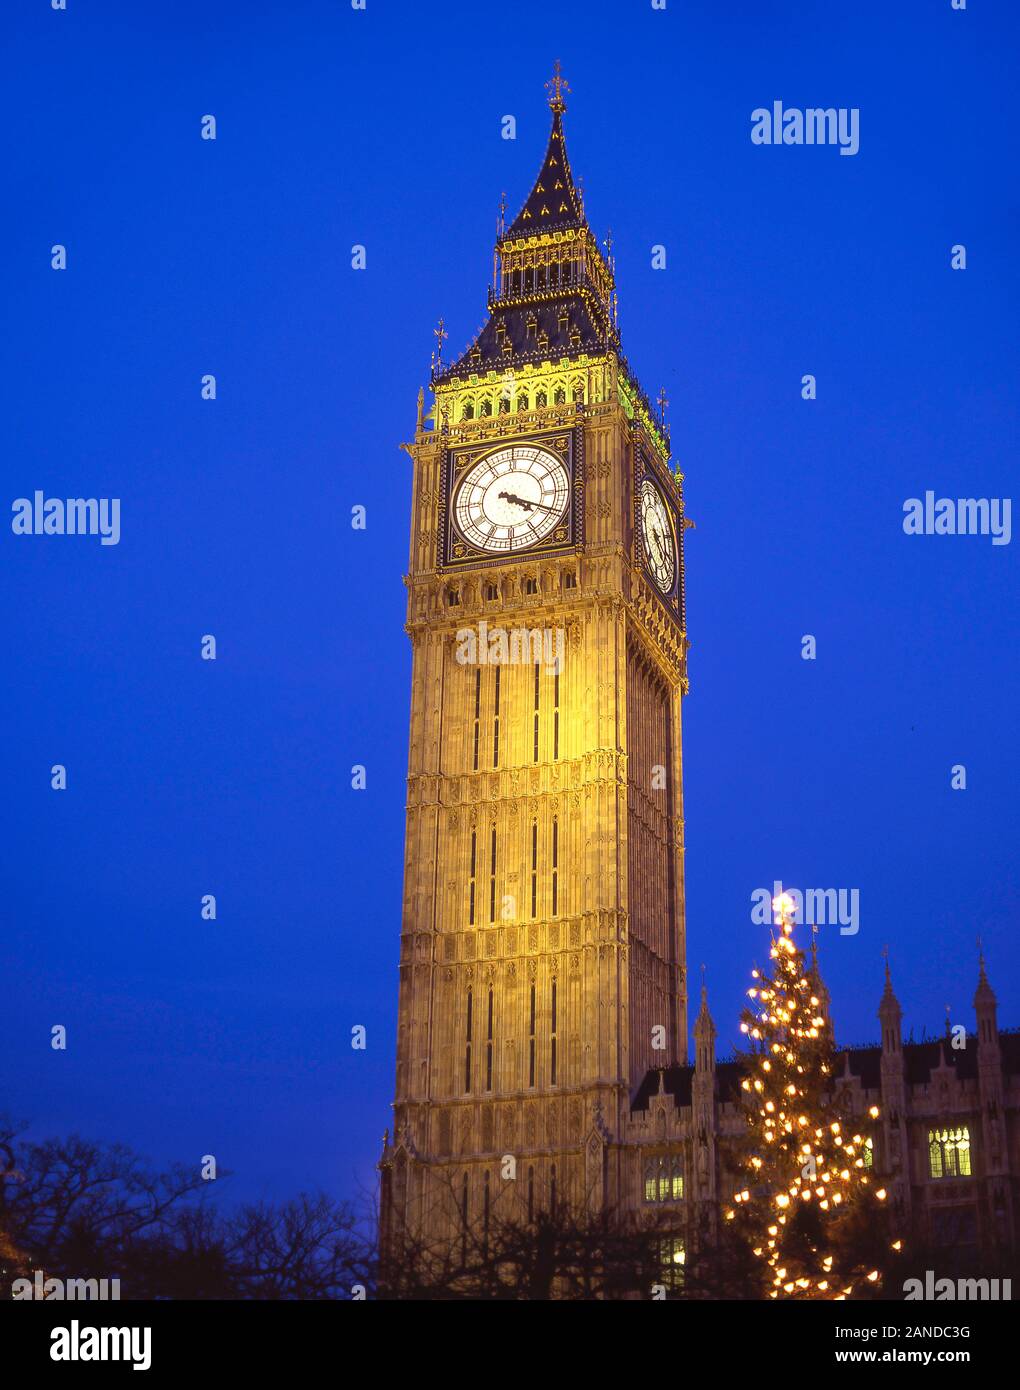 Big Ben (Elizabeth Tower) and Christmas tree from Parliament Square, City of Westminster, Greater London, England, United Kingdom Stock Photo